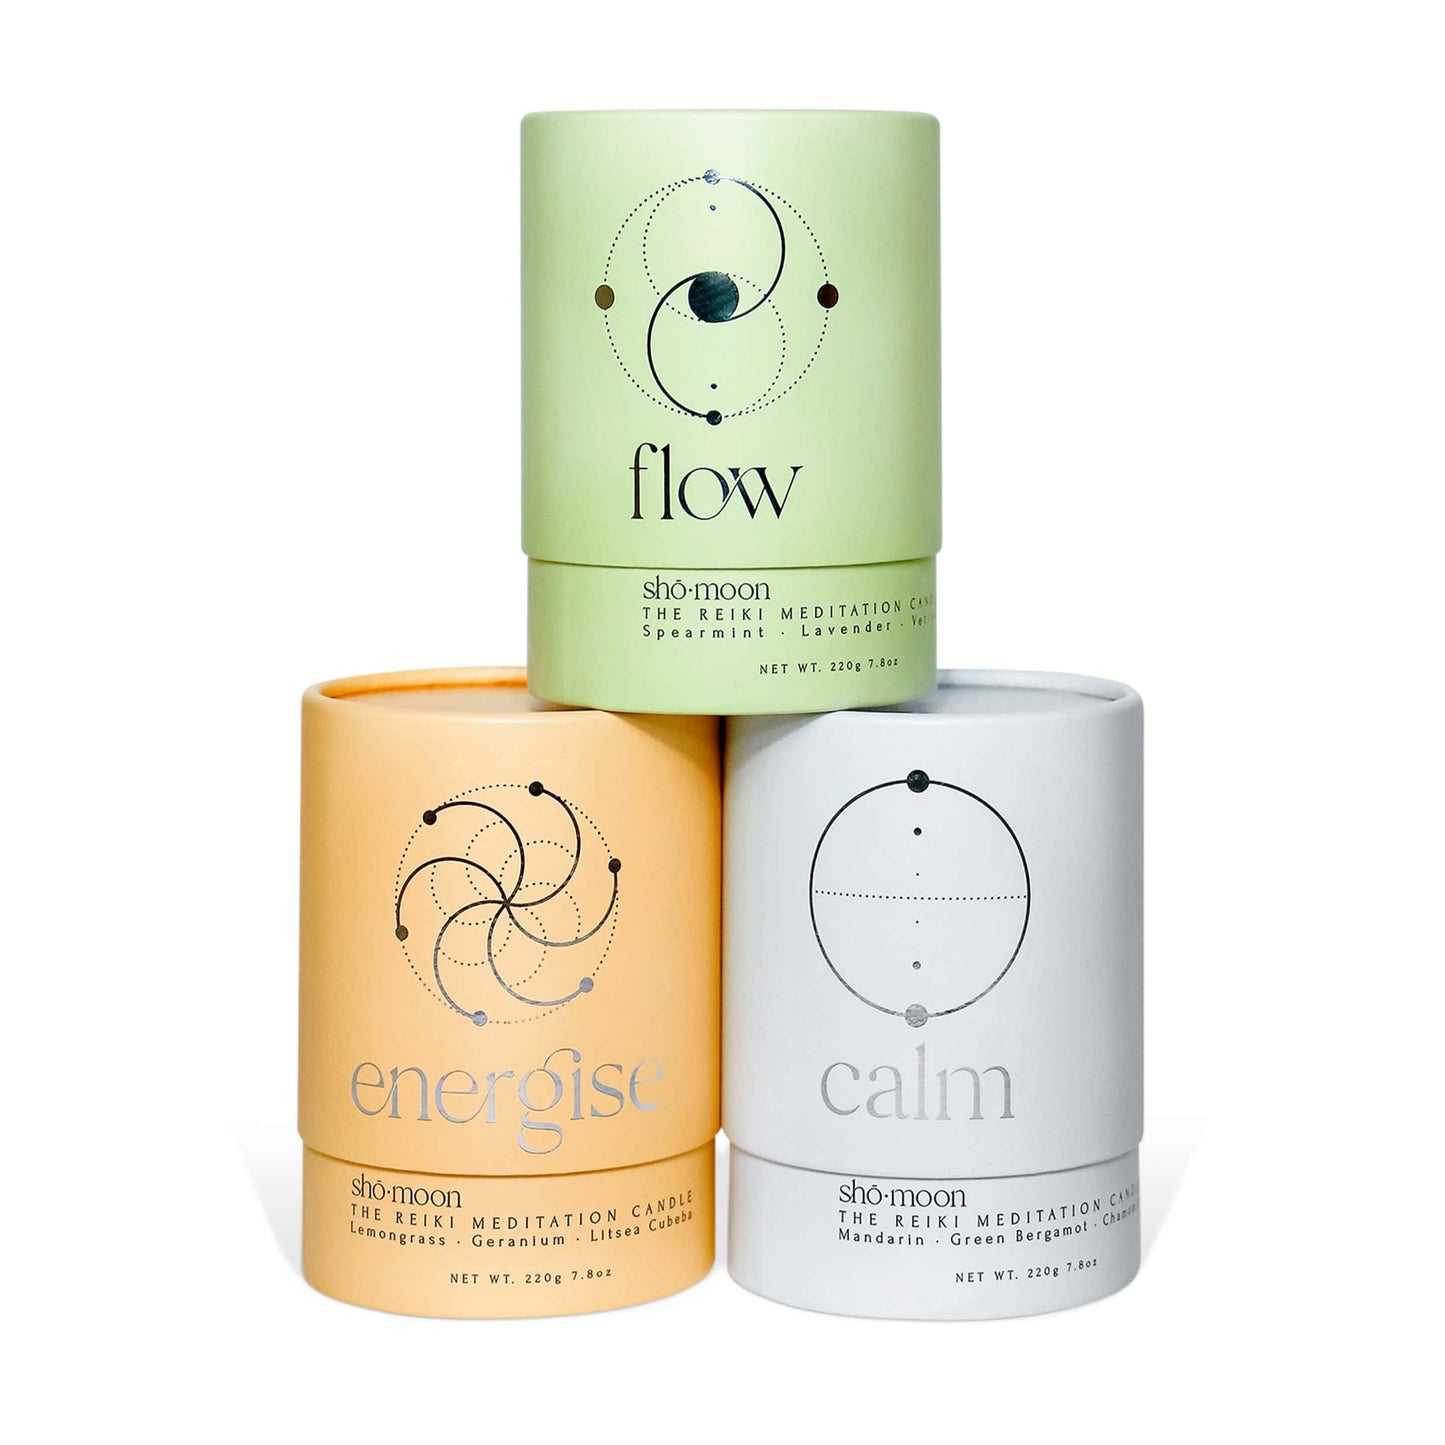 Set of three shō-moon Natural Aromatherapy Meditation Candles from the Intention Collection: Energise, Flow and Calm